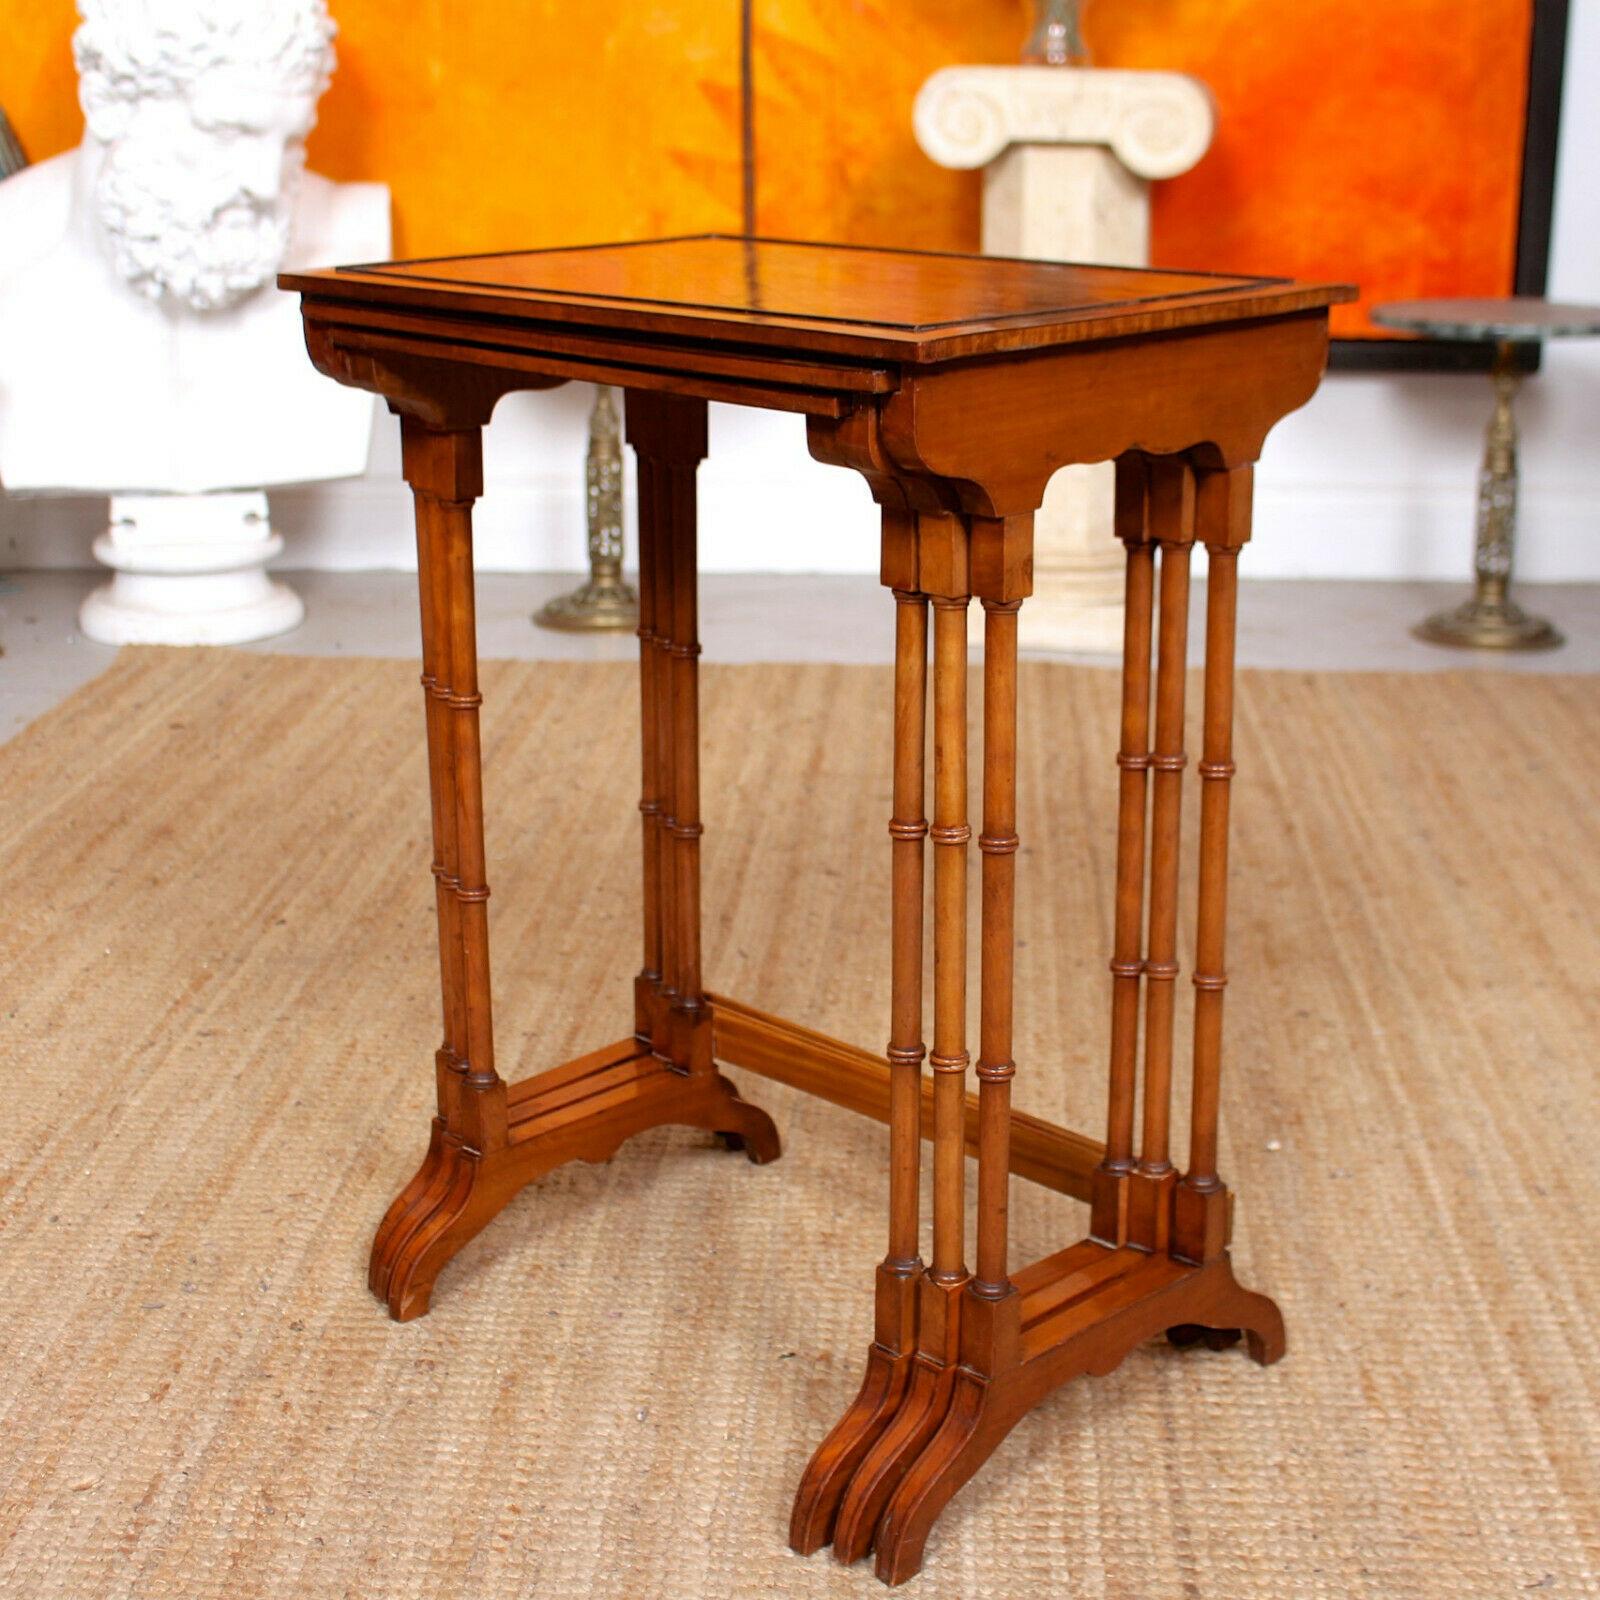 English Nest of Tables Satinwood Crossbanded 3 Side Tables Tall Georgian For Sale 5